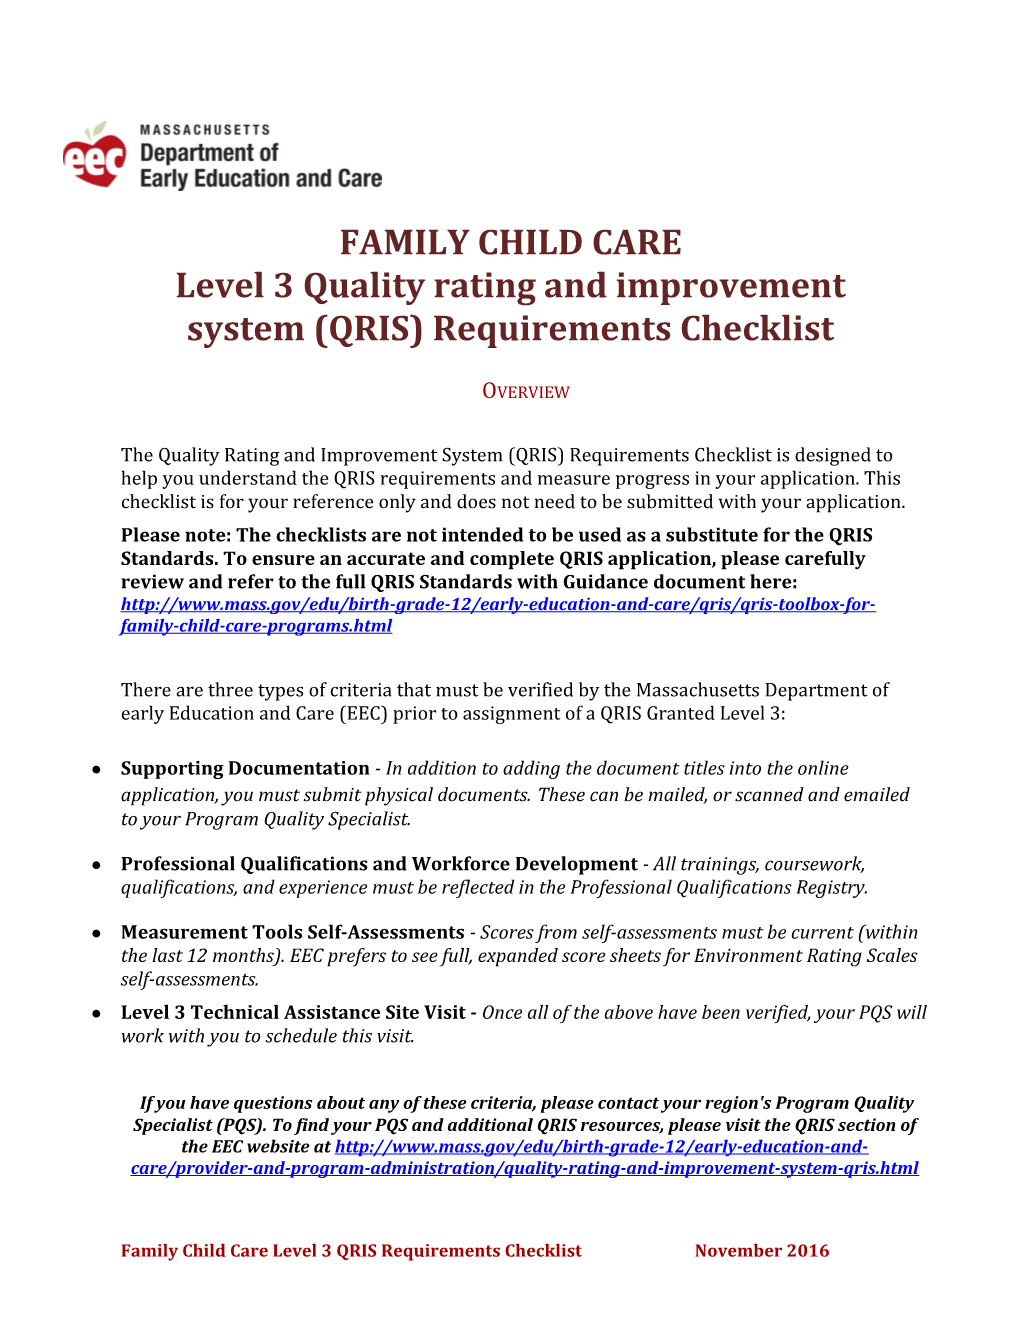 Level 3 Quality Rating and Improvement System (QRIS) Requirements Checklist